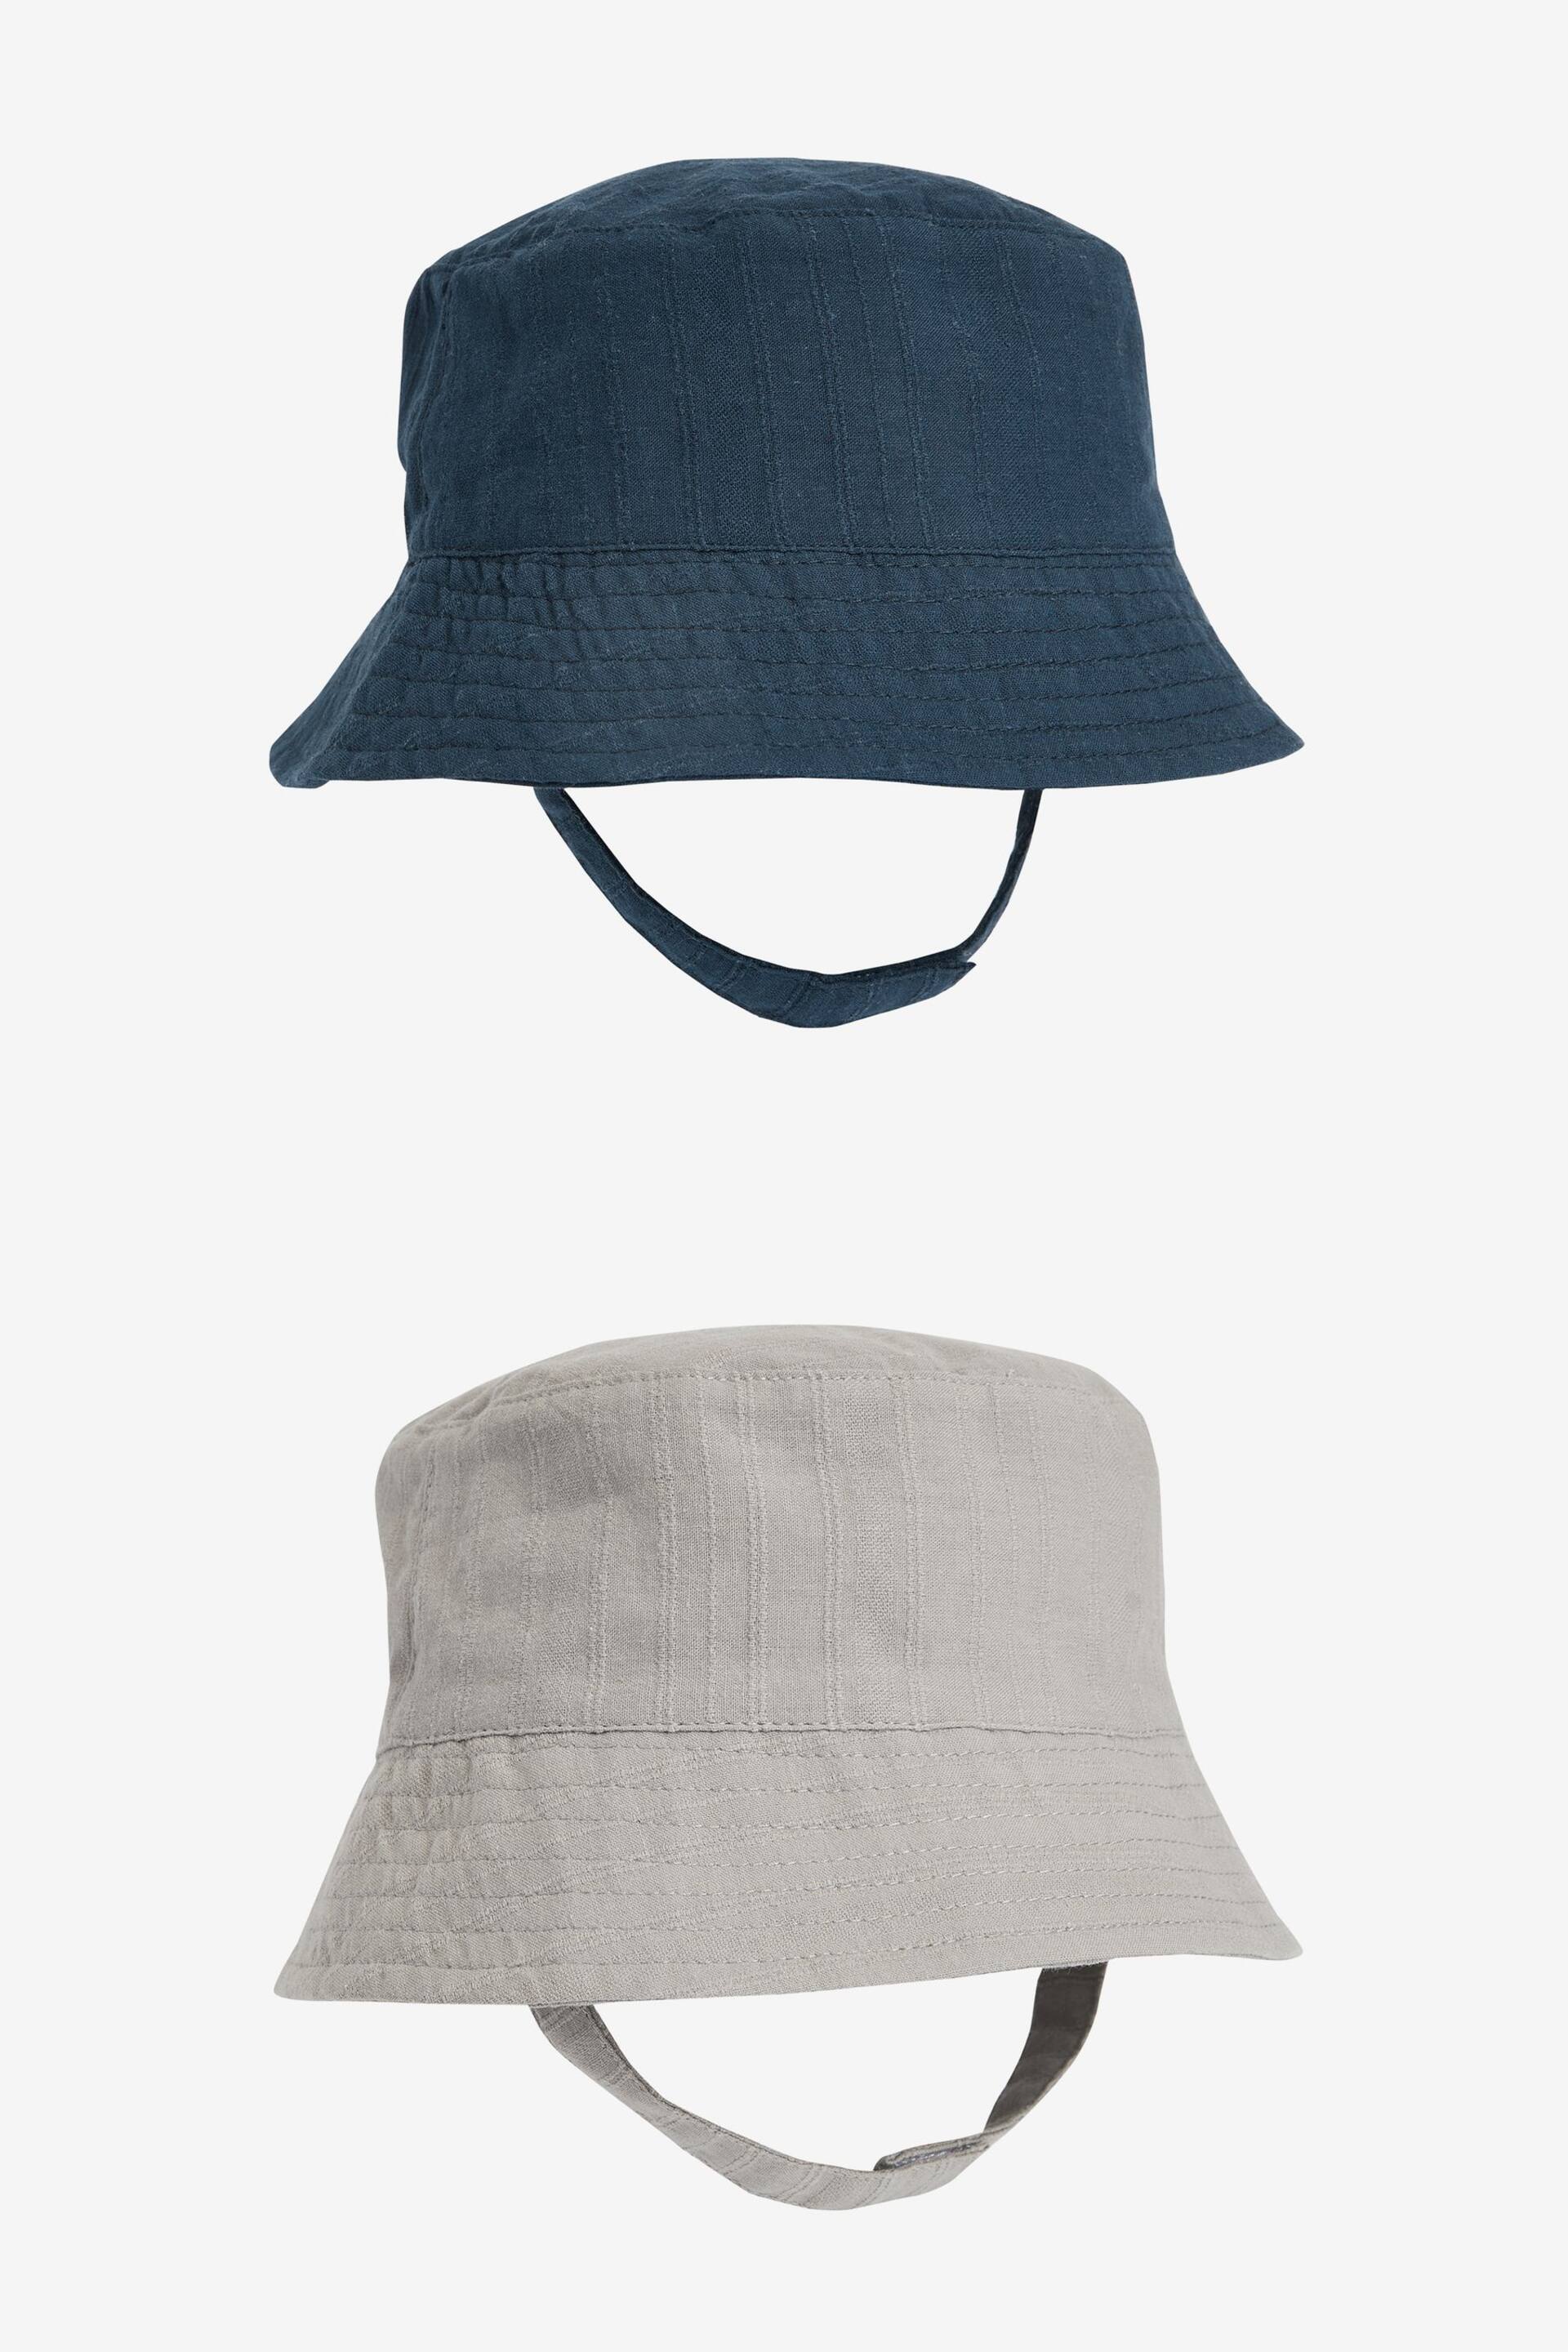 Navy Blue Baby Bucket Hats 2 Pack (0mths-2yrs) - Image 1 of 5